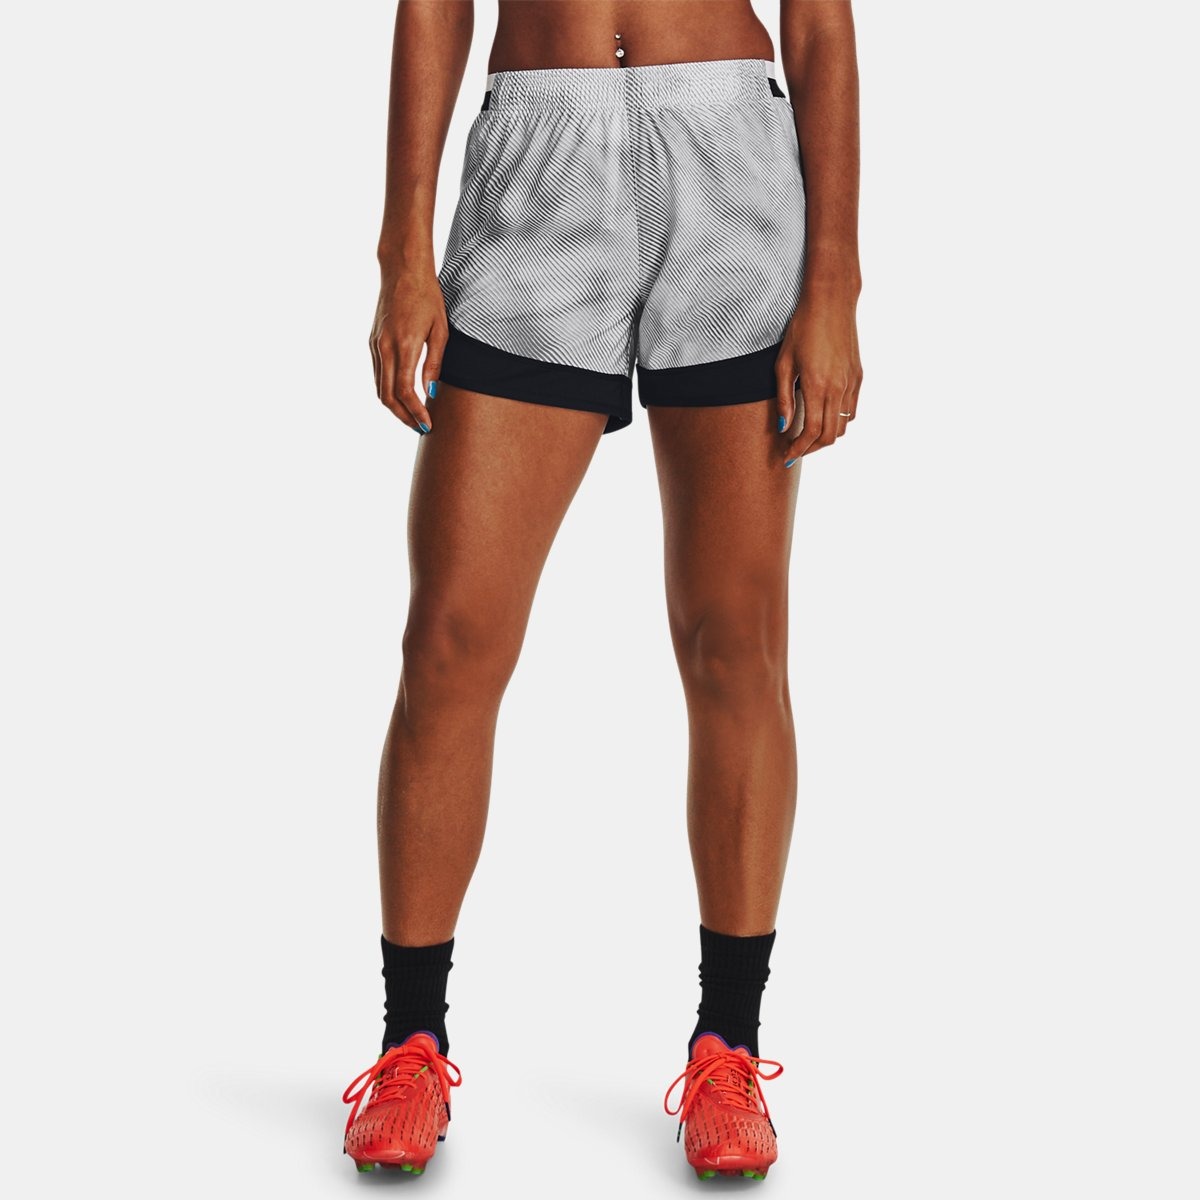 Women's Shorts in Grey at Under Armour GOOFASH